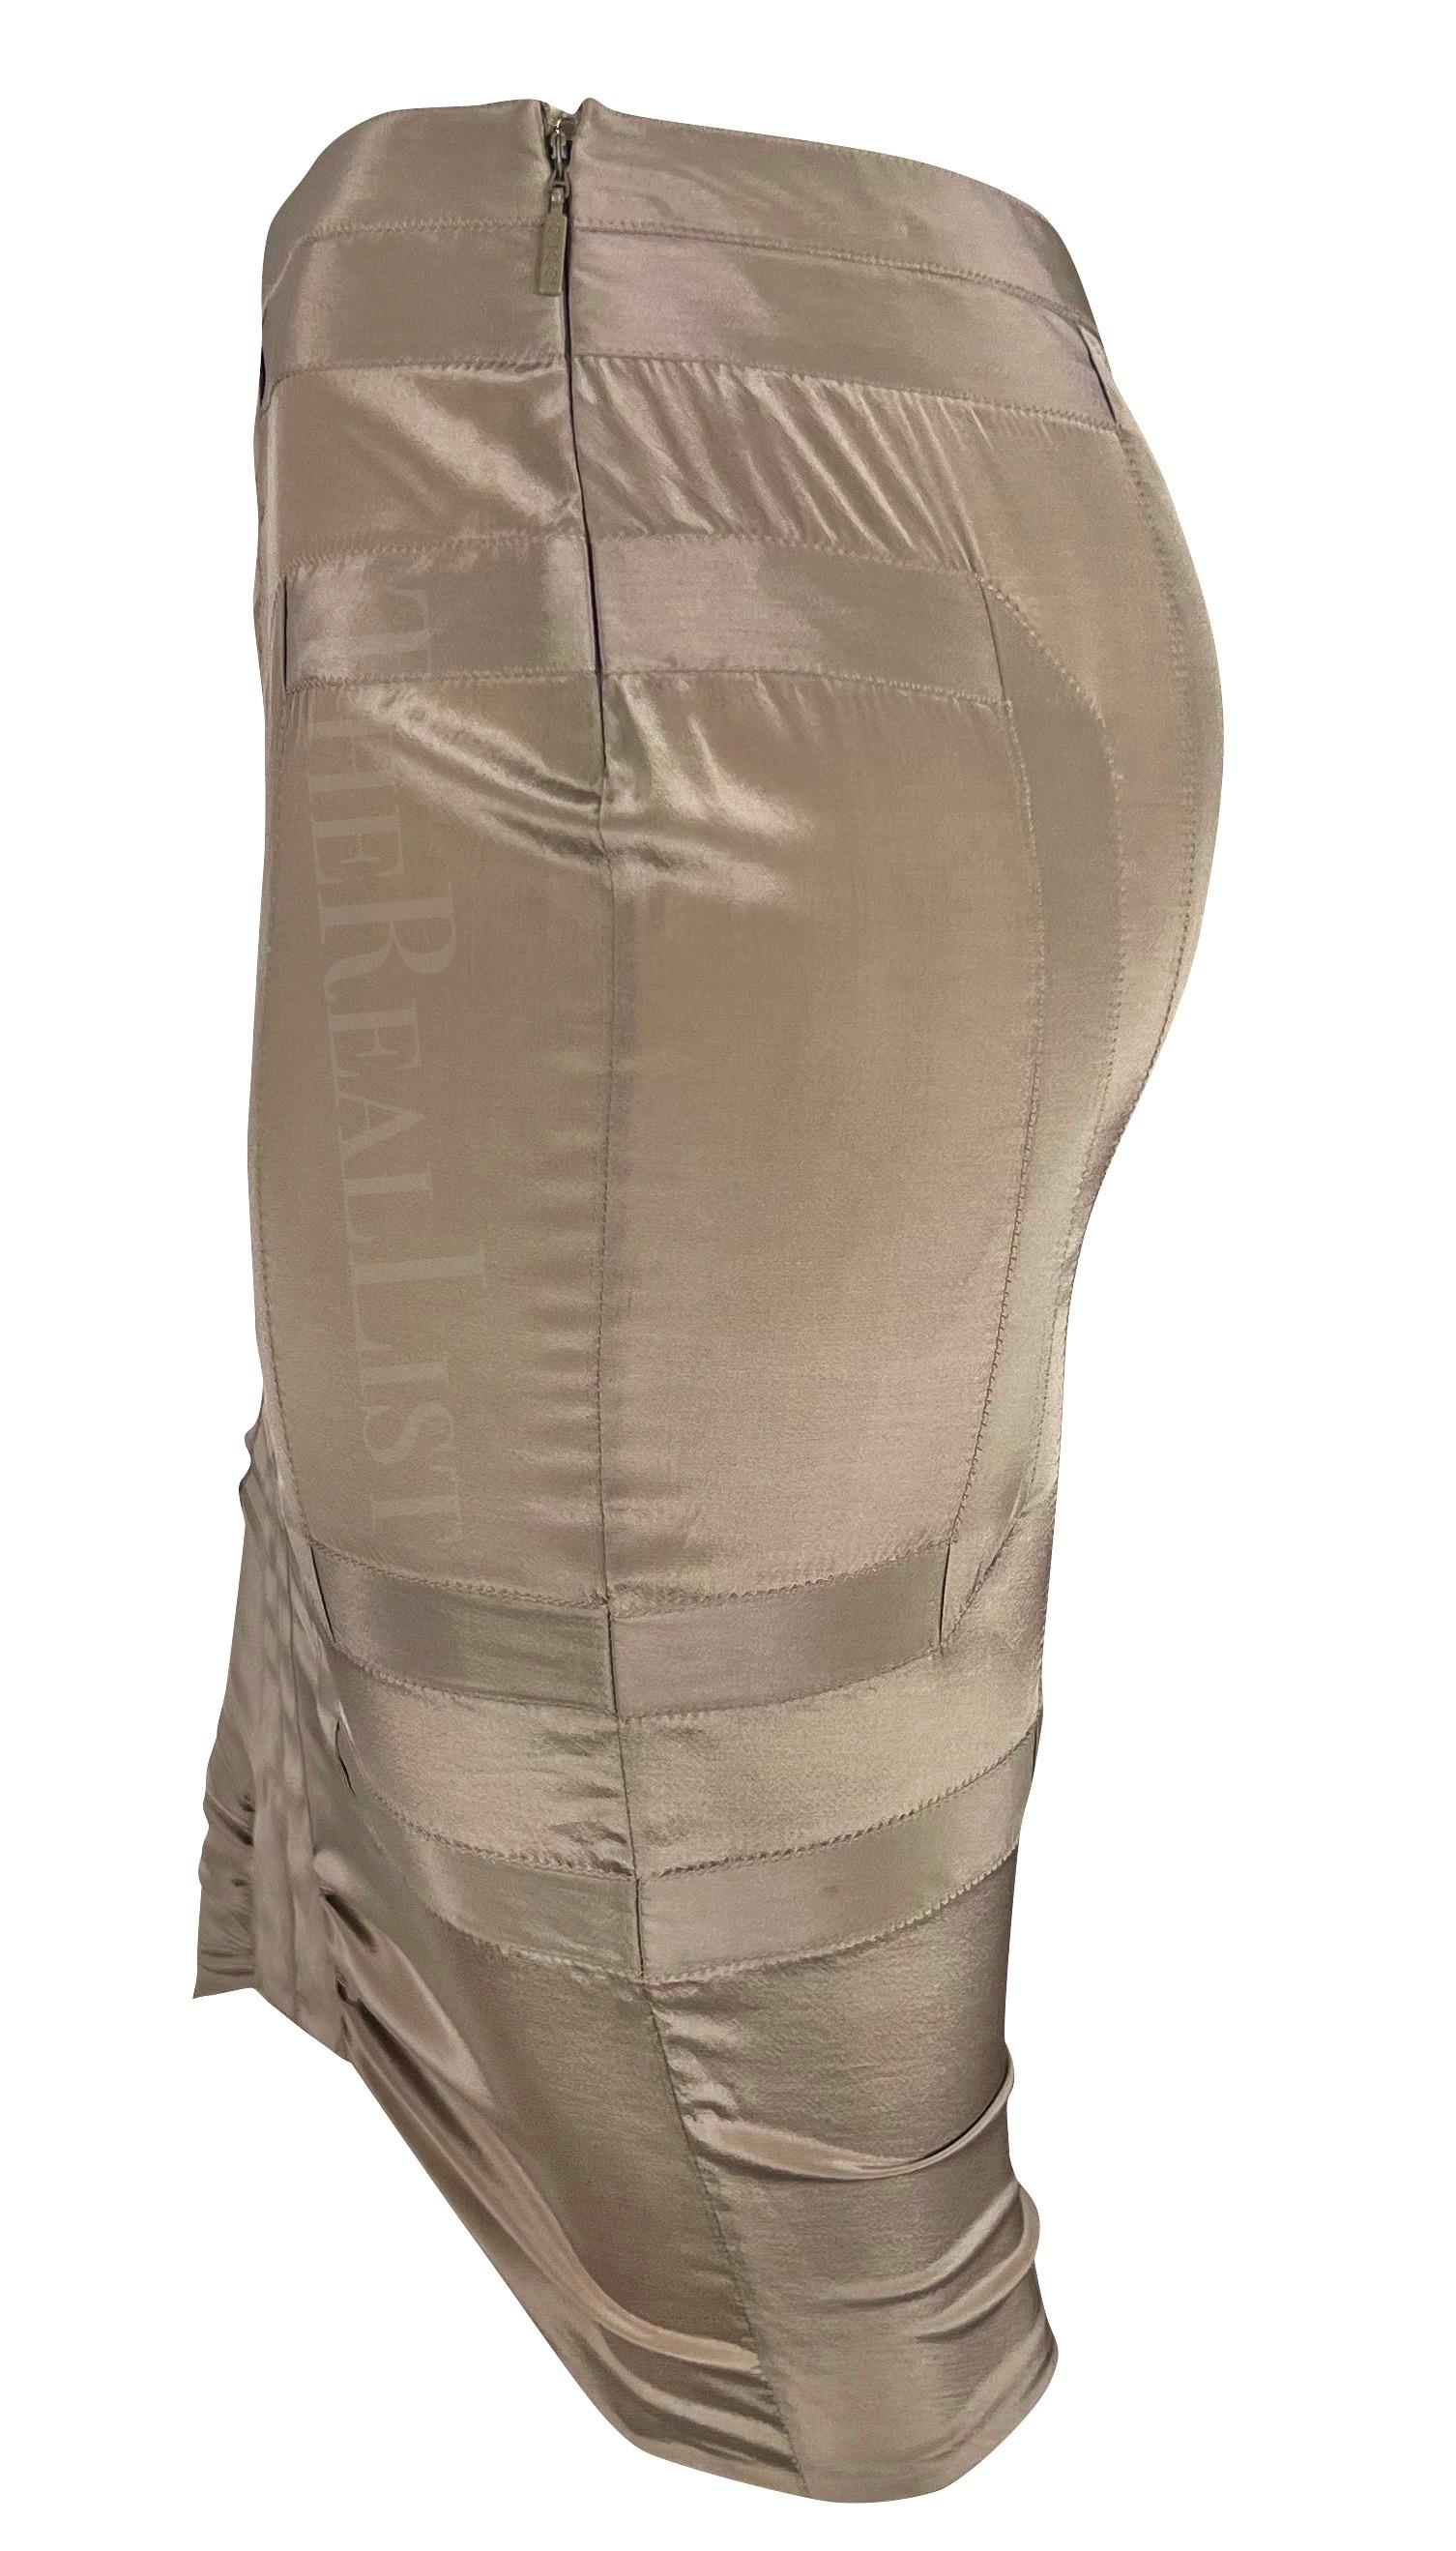 NWT S/S 2005 Gucci Taupe Panel Wiggle Pencil Skirt In Excellent Condition For Sale In West Hollywood, CA